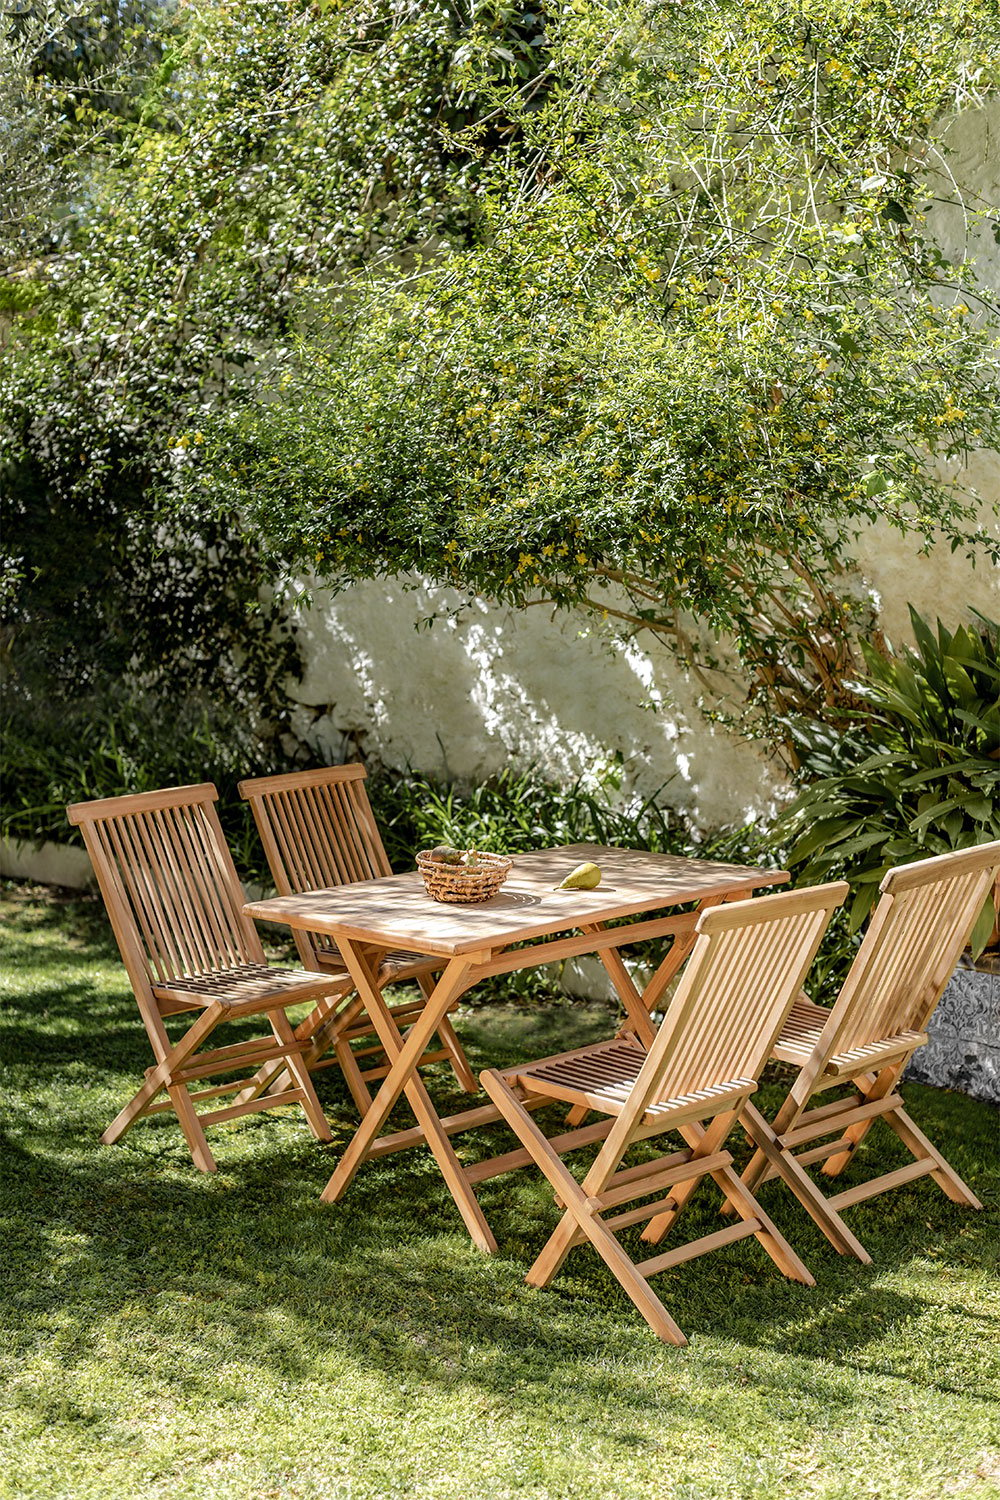 Set of Rectangular Table (120x70 cm) and 4 Folding Garden Chairs in Pira Teak Wood, gallery image 1